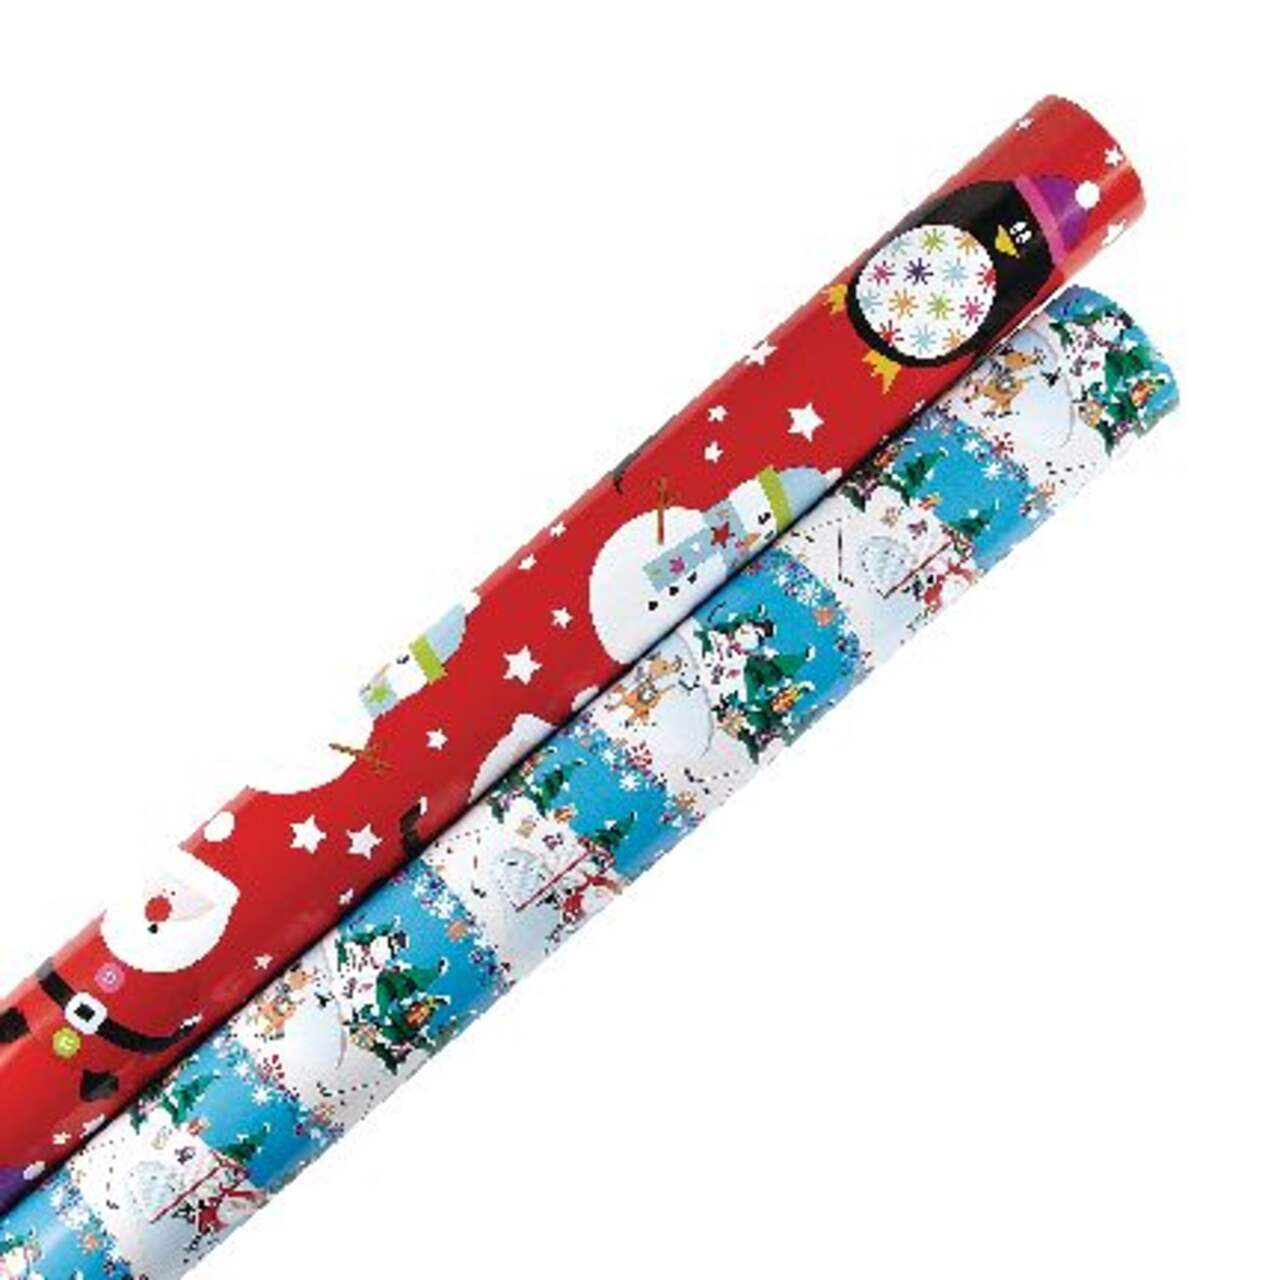 U'COVER Christmas Wrapping Paper Jumbo Rolls for Nepal